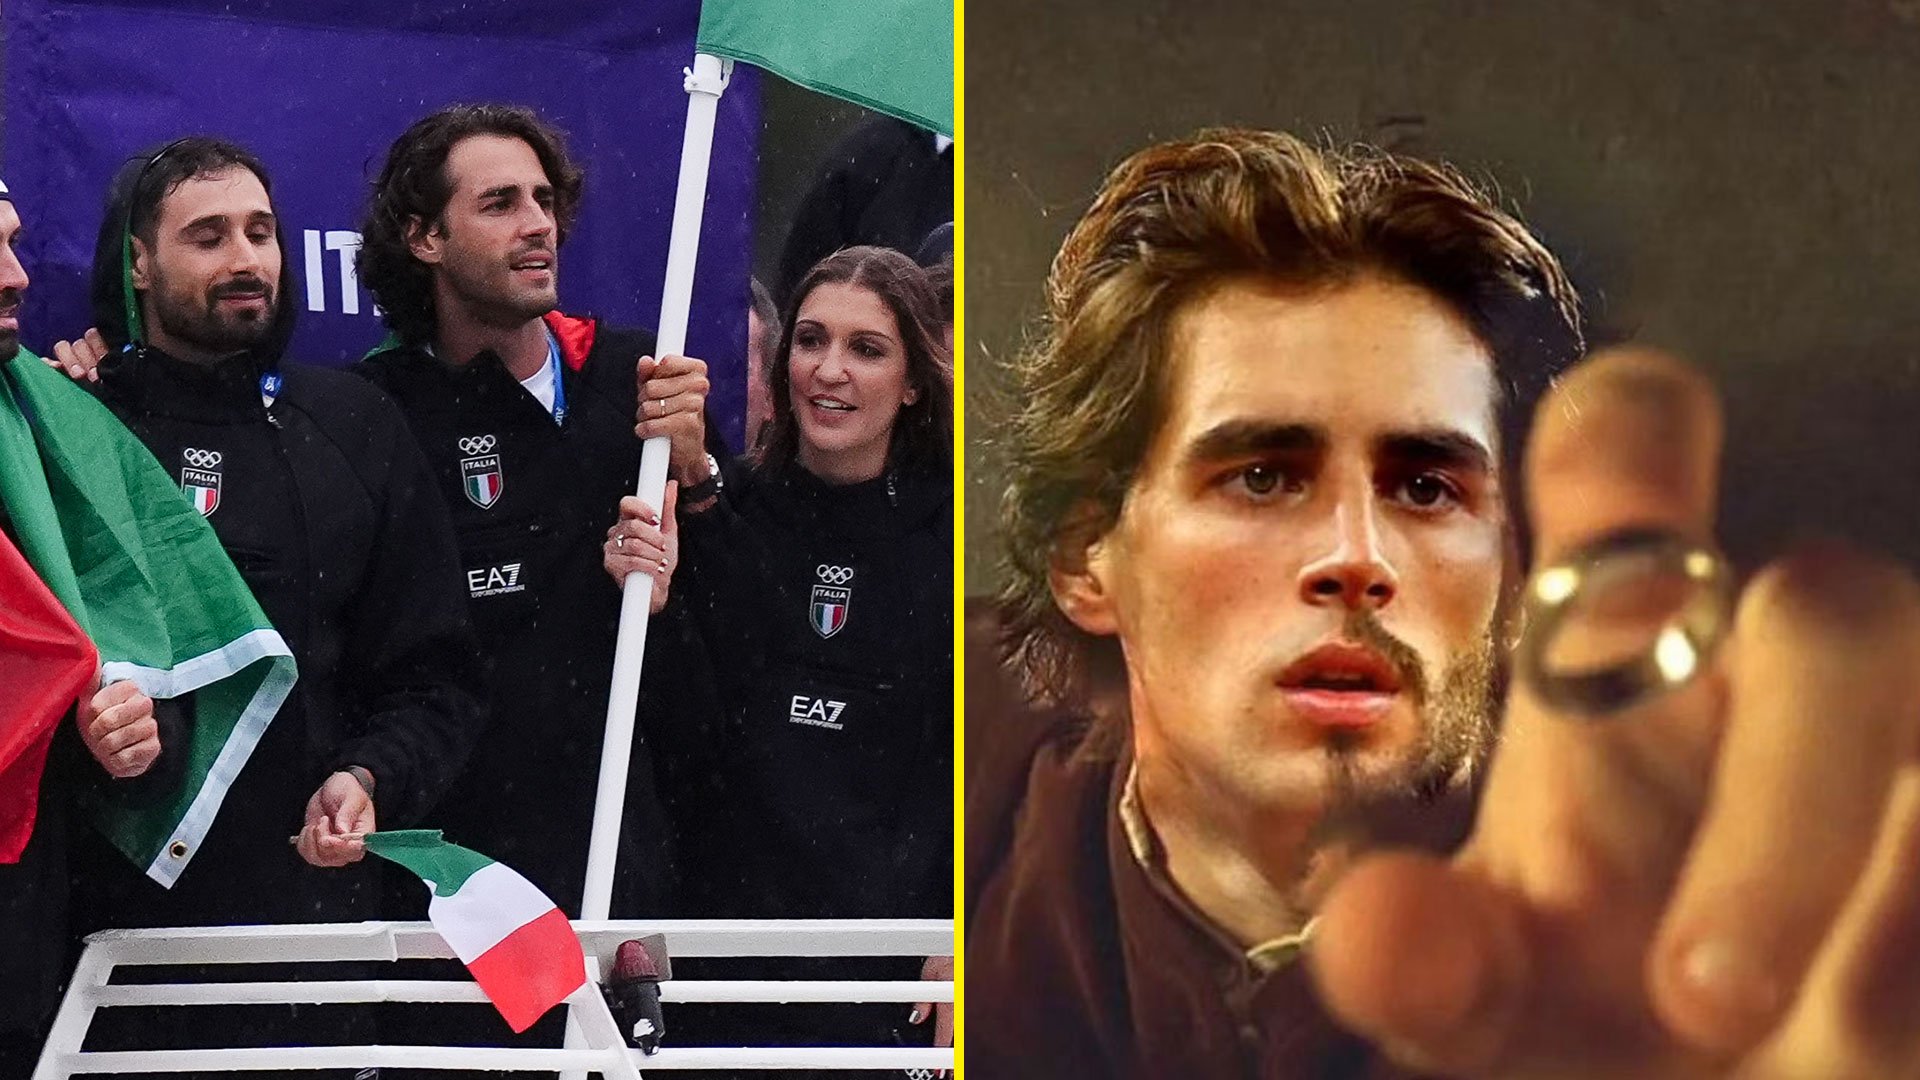 Italy's flagbearer issues grovelling apology to wife after losing wedding ring in opening ceremony